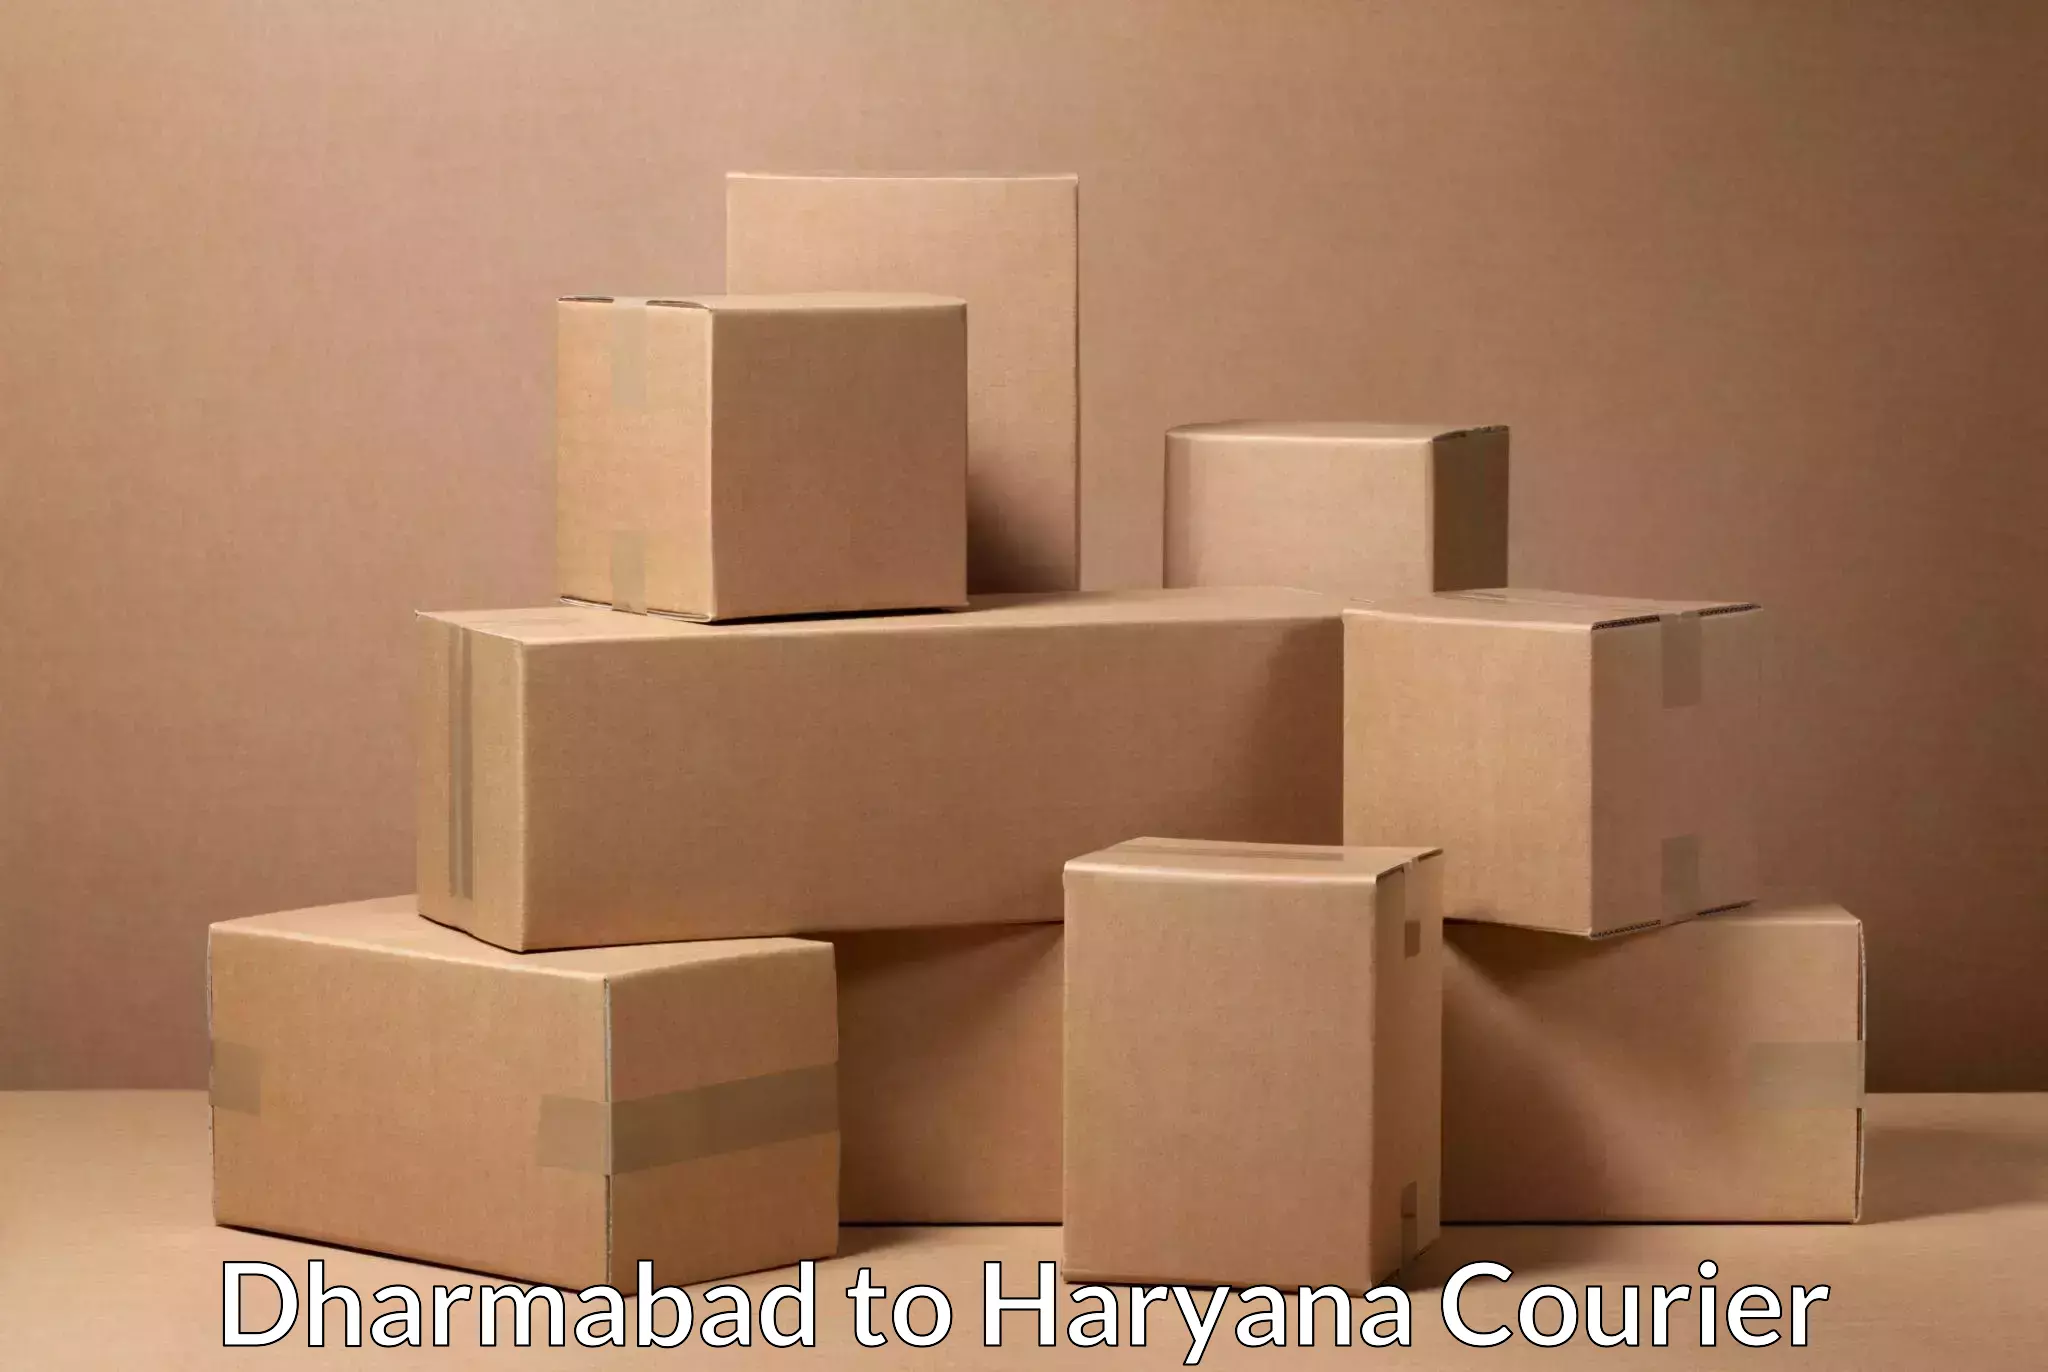 Professional courier handling in Dharmabad to Jhajjar